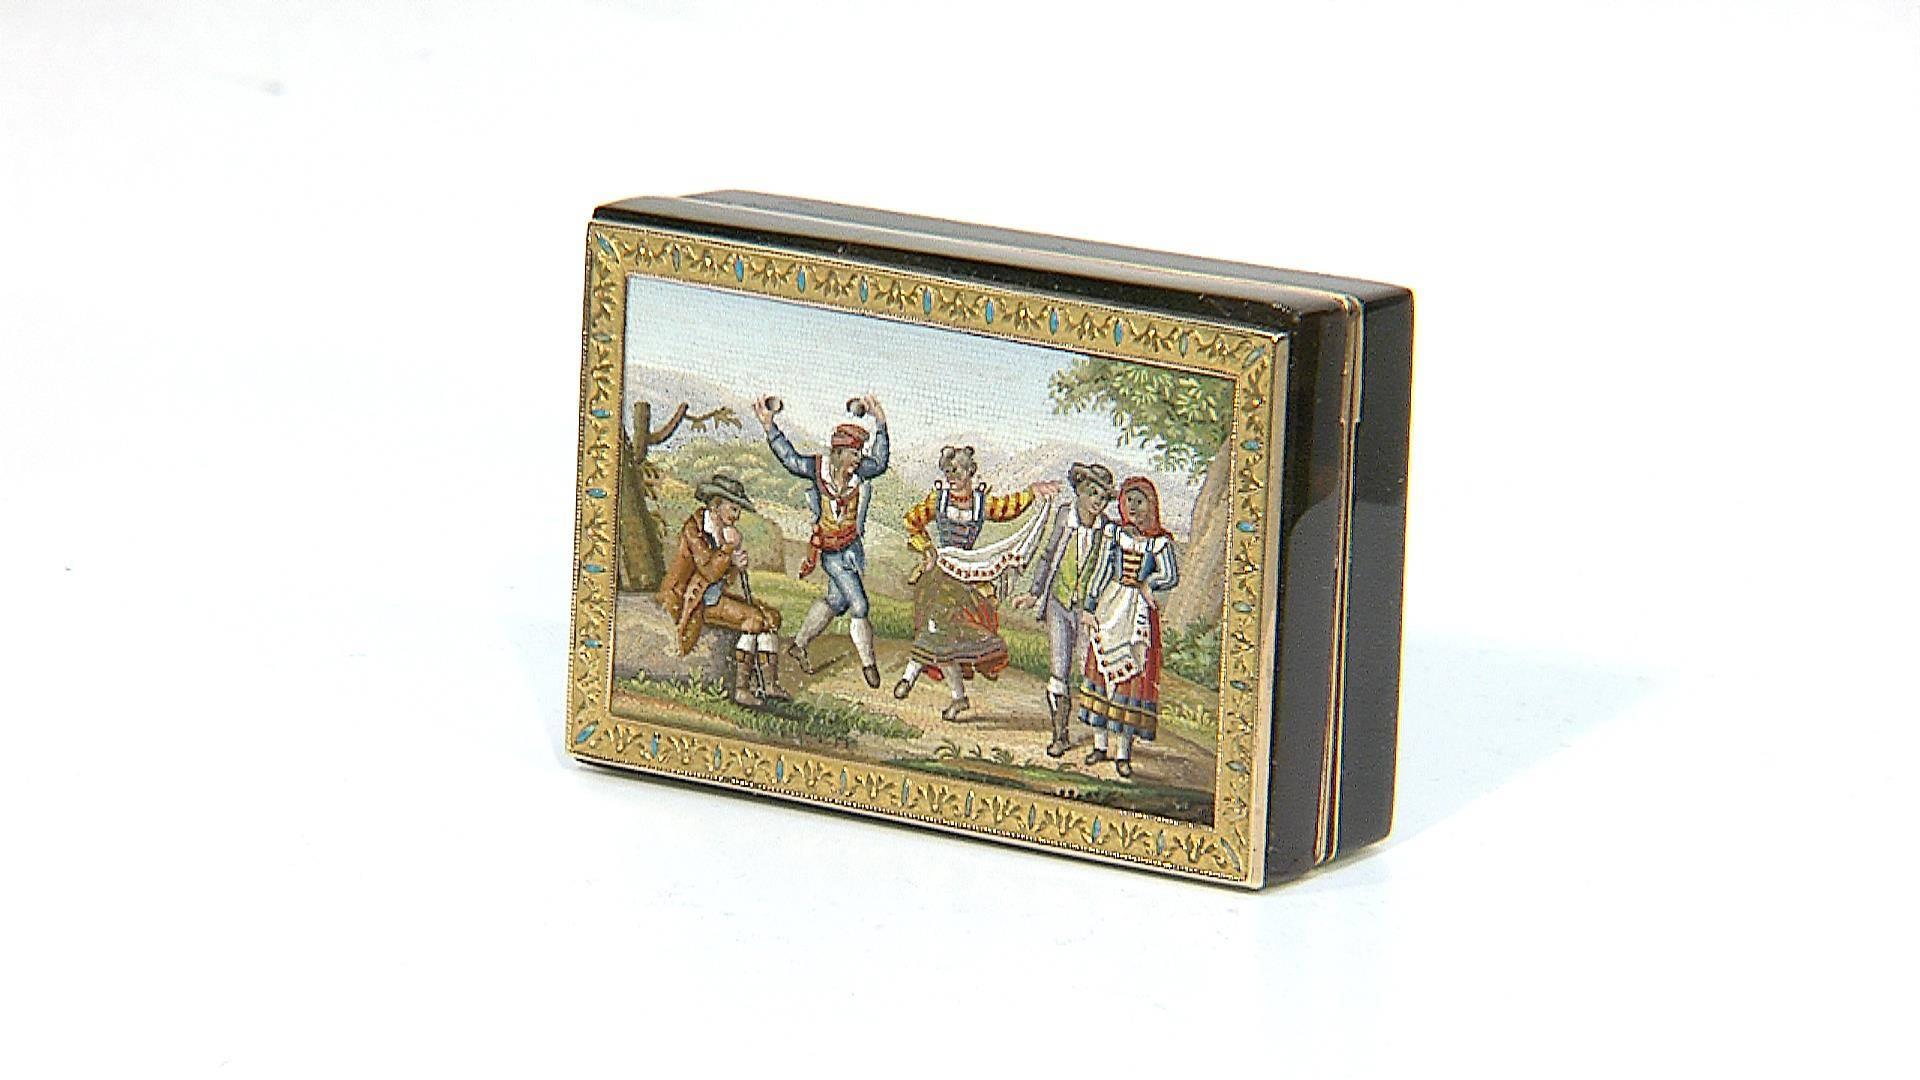 Rectangular snuff box in tortoise shell with gold and enamel framing.
From the Vatican school “Reverenda Fabrica Sancti Petri,”
Rome, late 18th century.

The fine micromosaic depicts a country festivity, and what appears to be an Italian